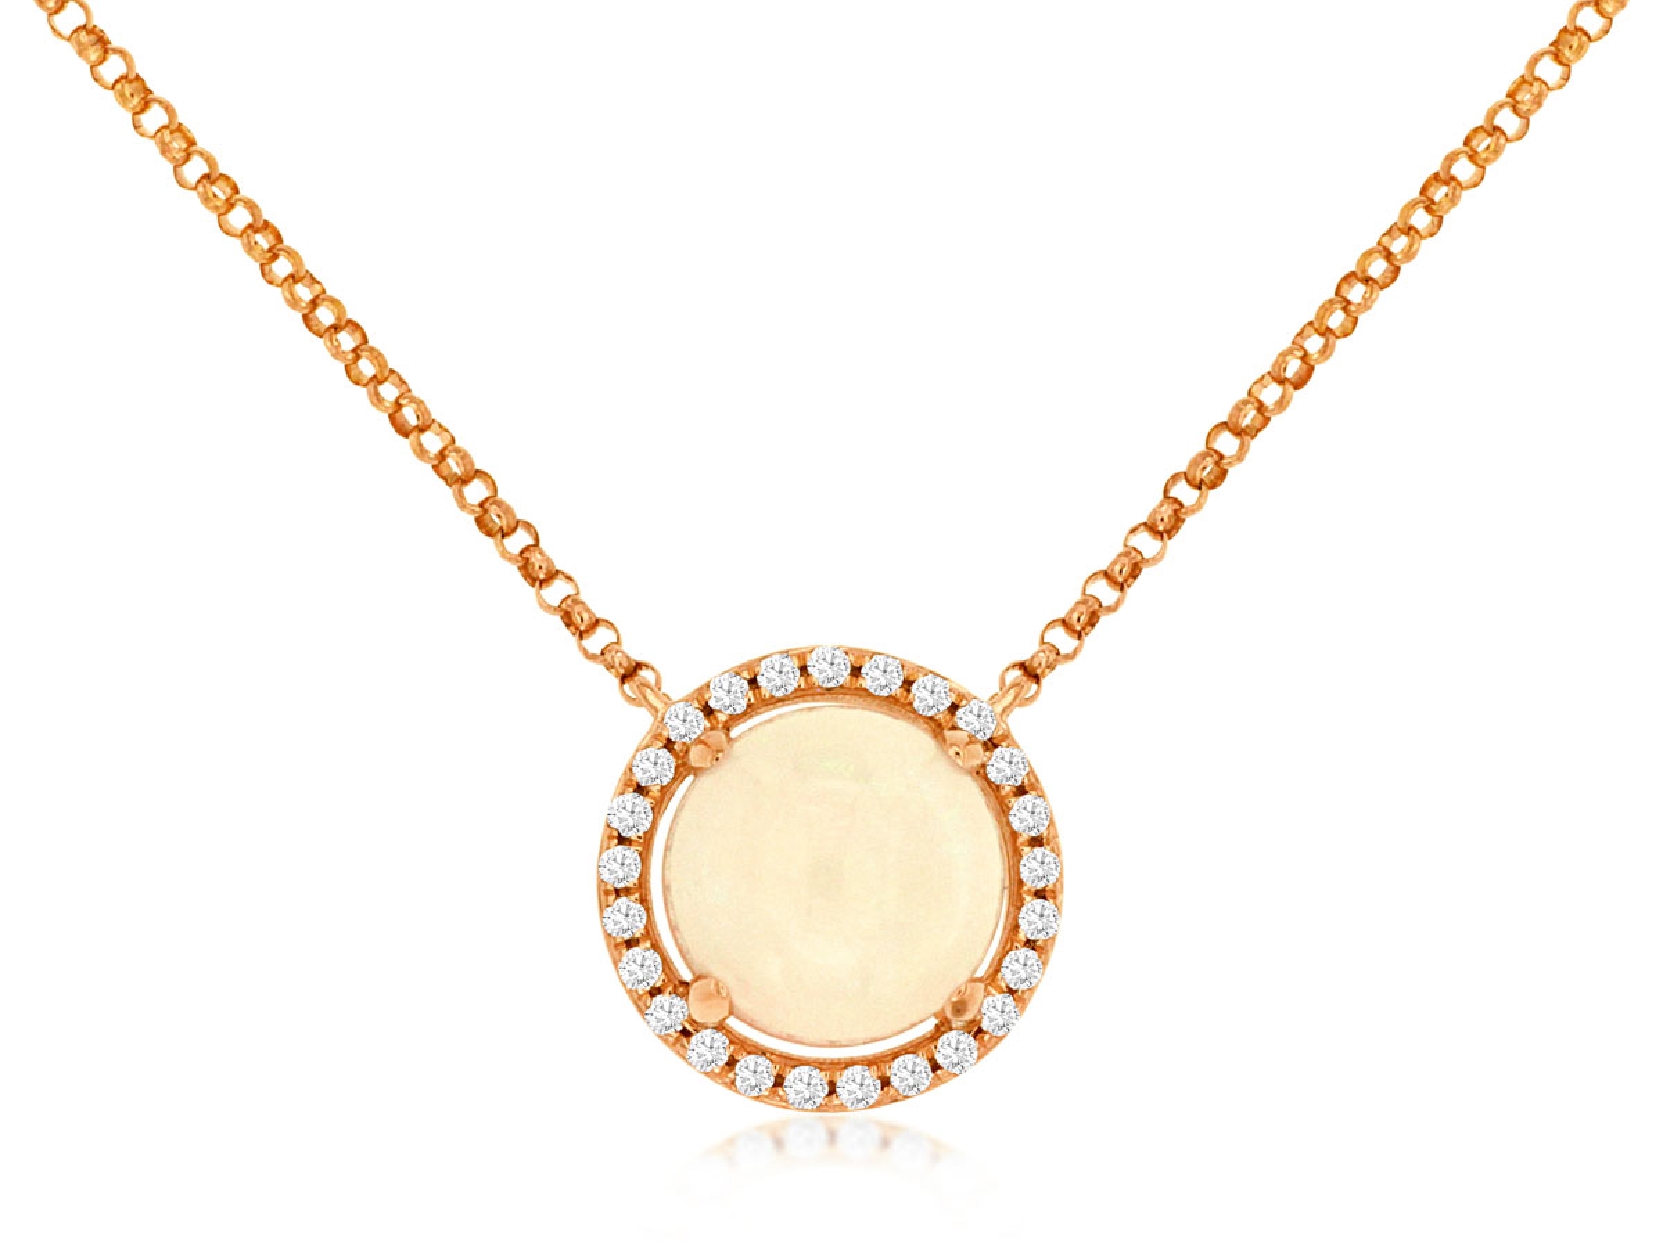 14K Rose Gold Round Ethiopian Opal Stationary Pendant with Diamond Halo on an 18 inch Chain
1.20CT Opal
0.14CTTW Diamonds